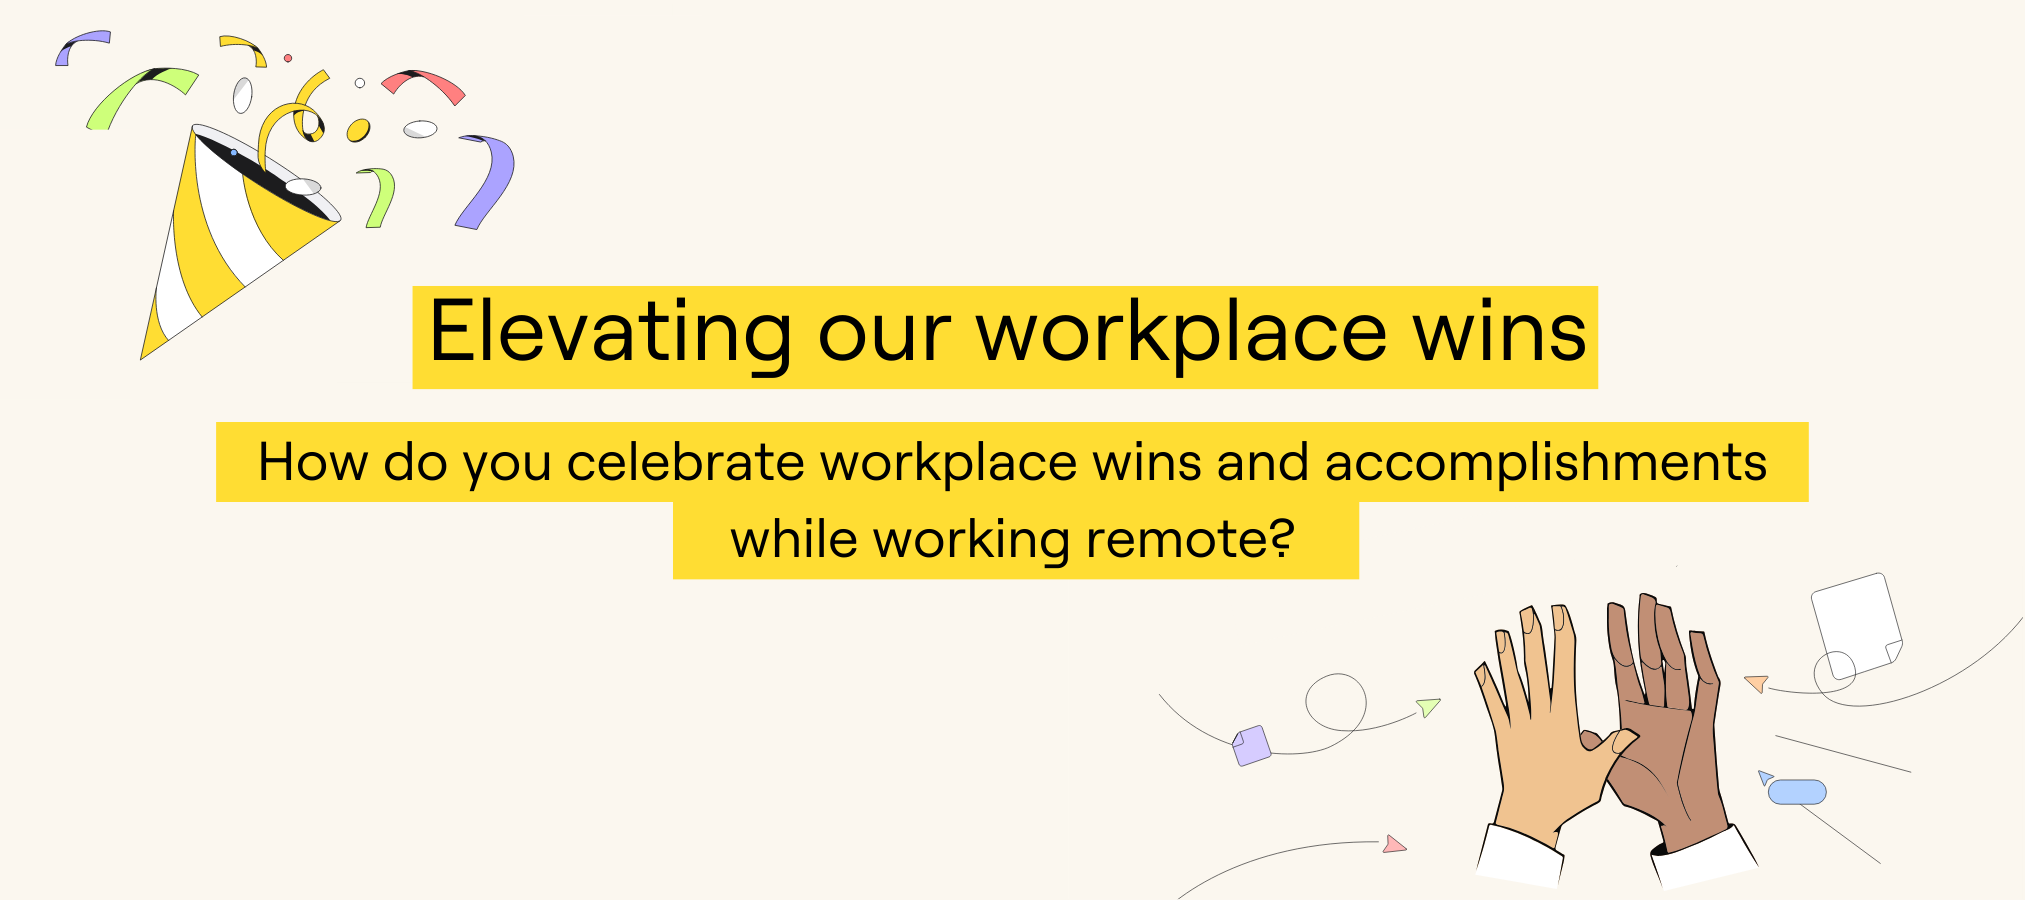 🎉 Join the Miro "Celebrating Remote Work Wins" challenge for a chance to win 🏆